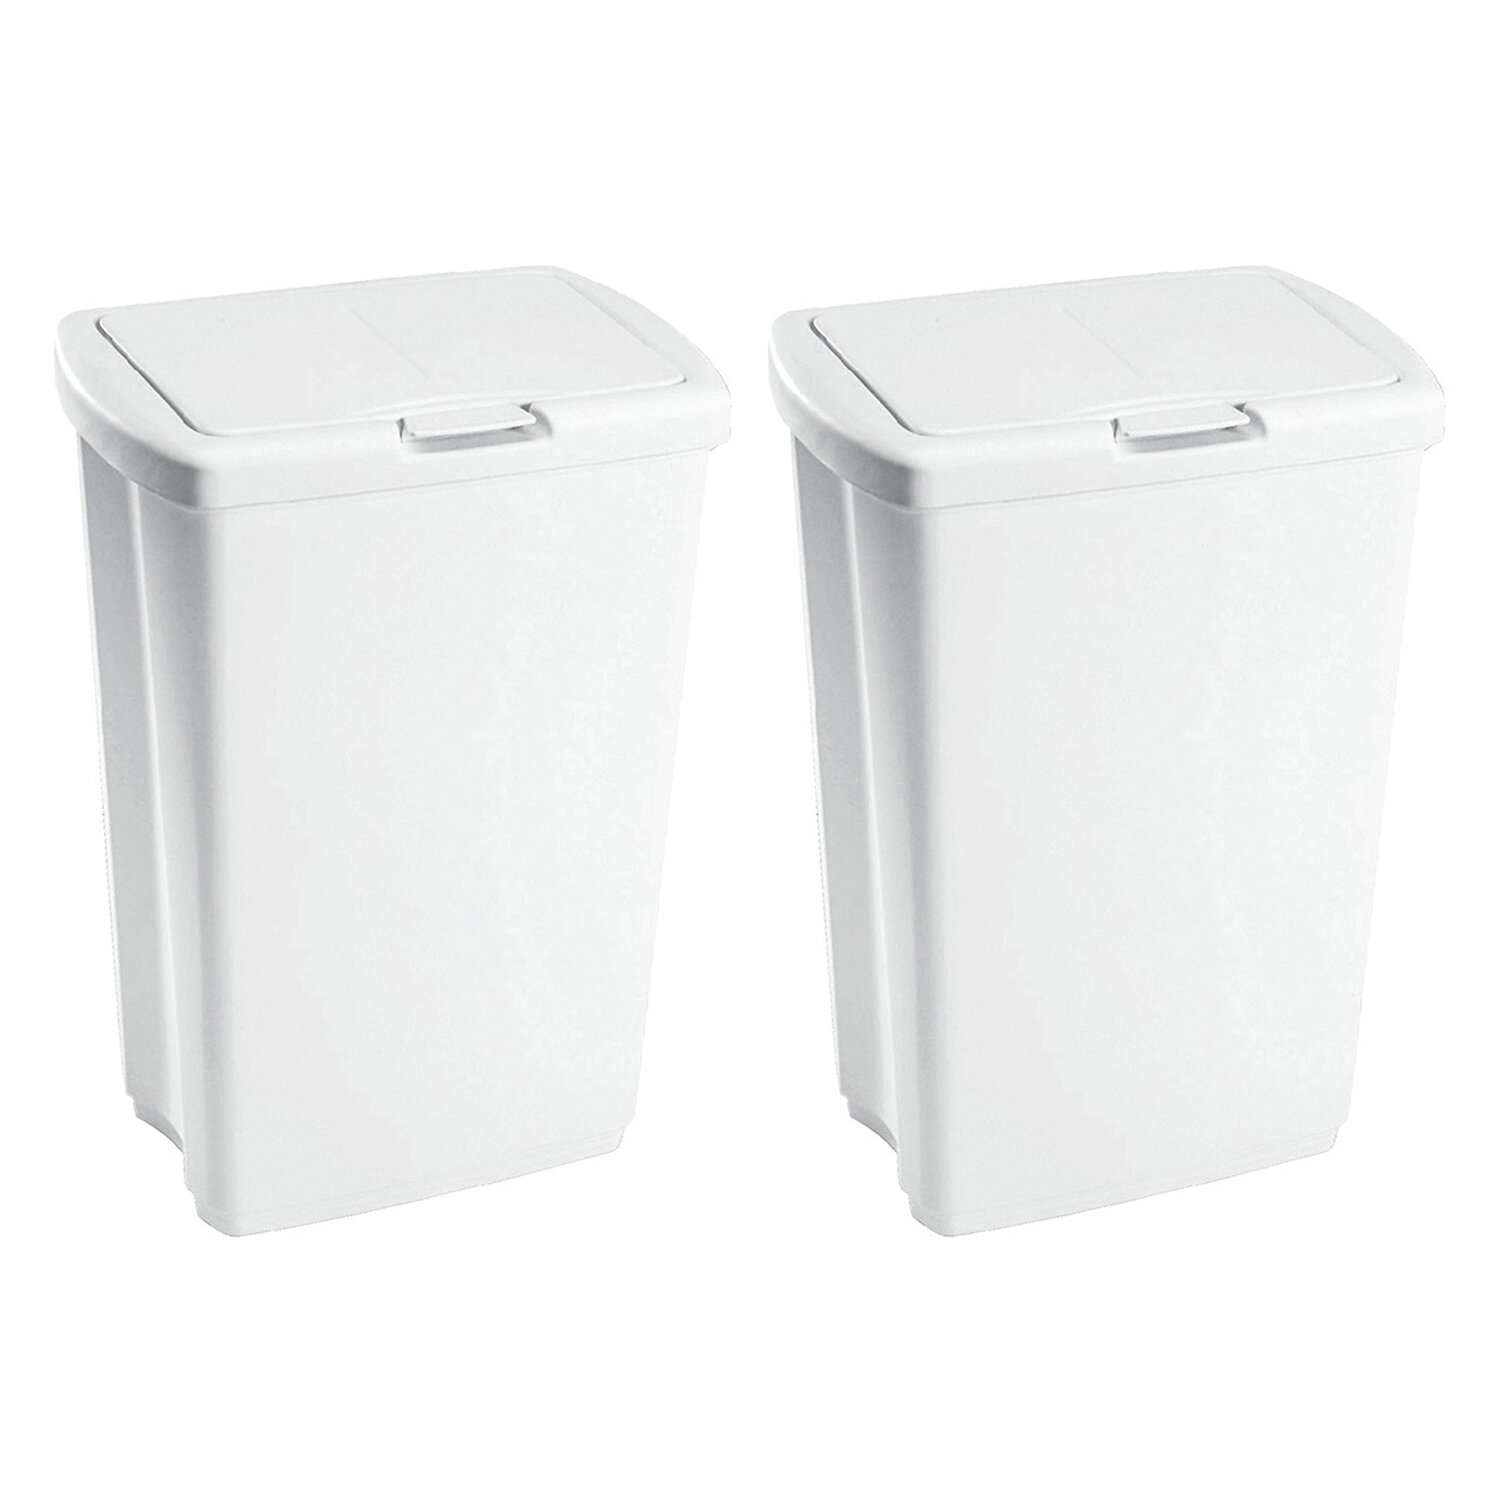 Rubbermaid Commercial Products Plastic Manual Lift Trash Can